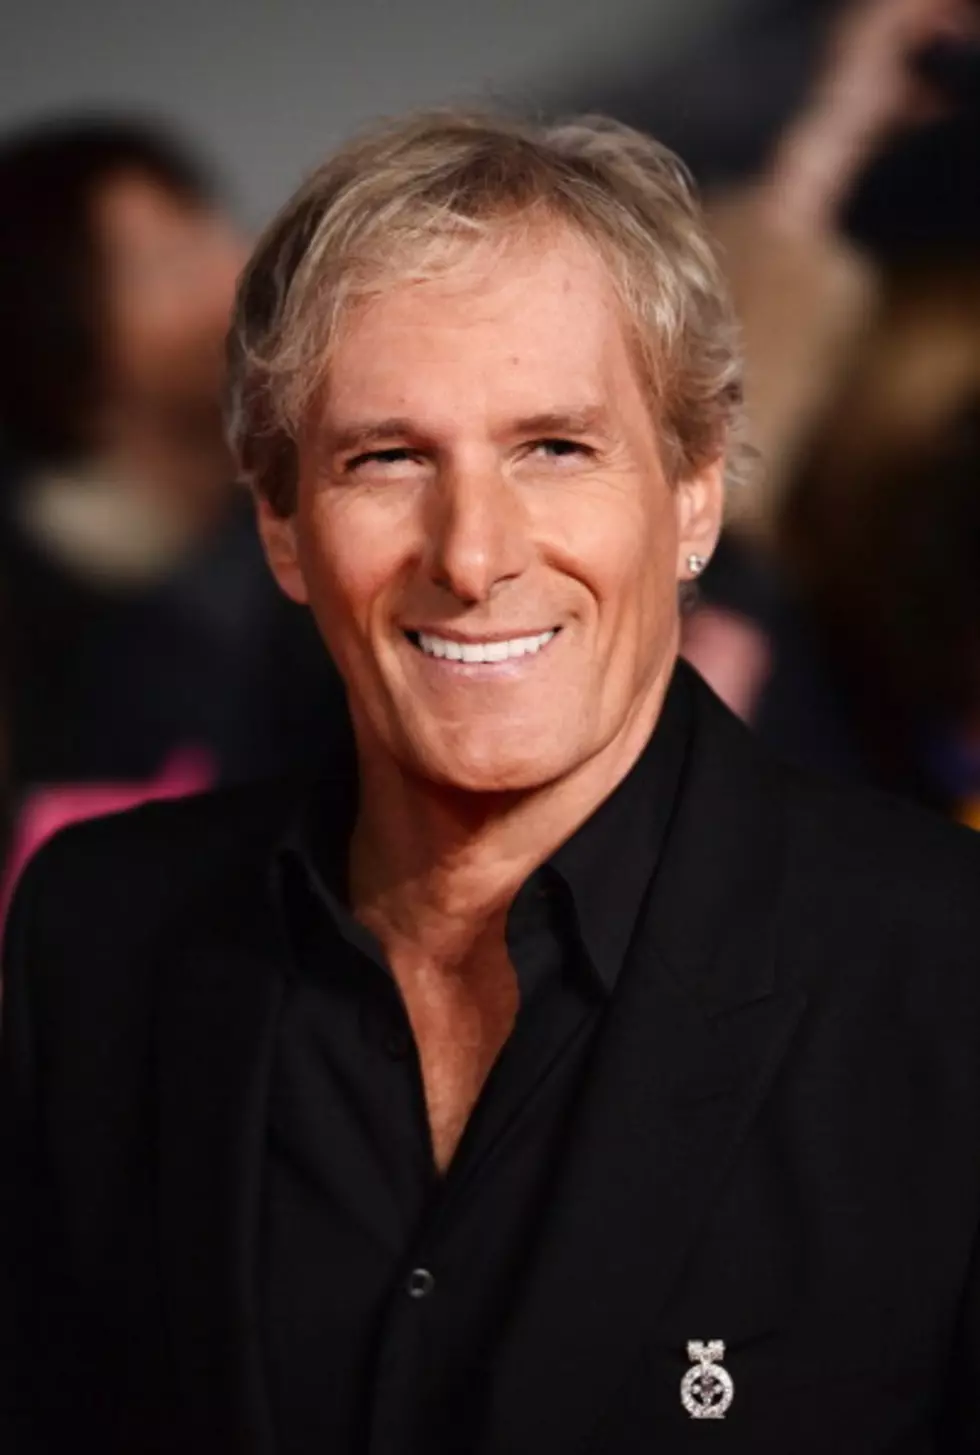 Hang Out With Michael Bolton At The Office [VIDEO]